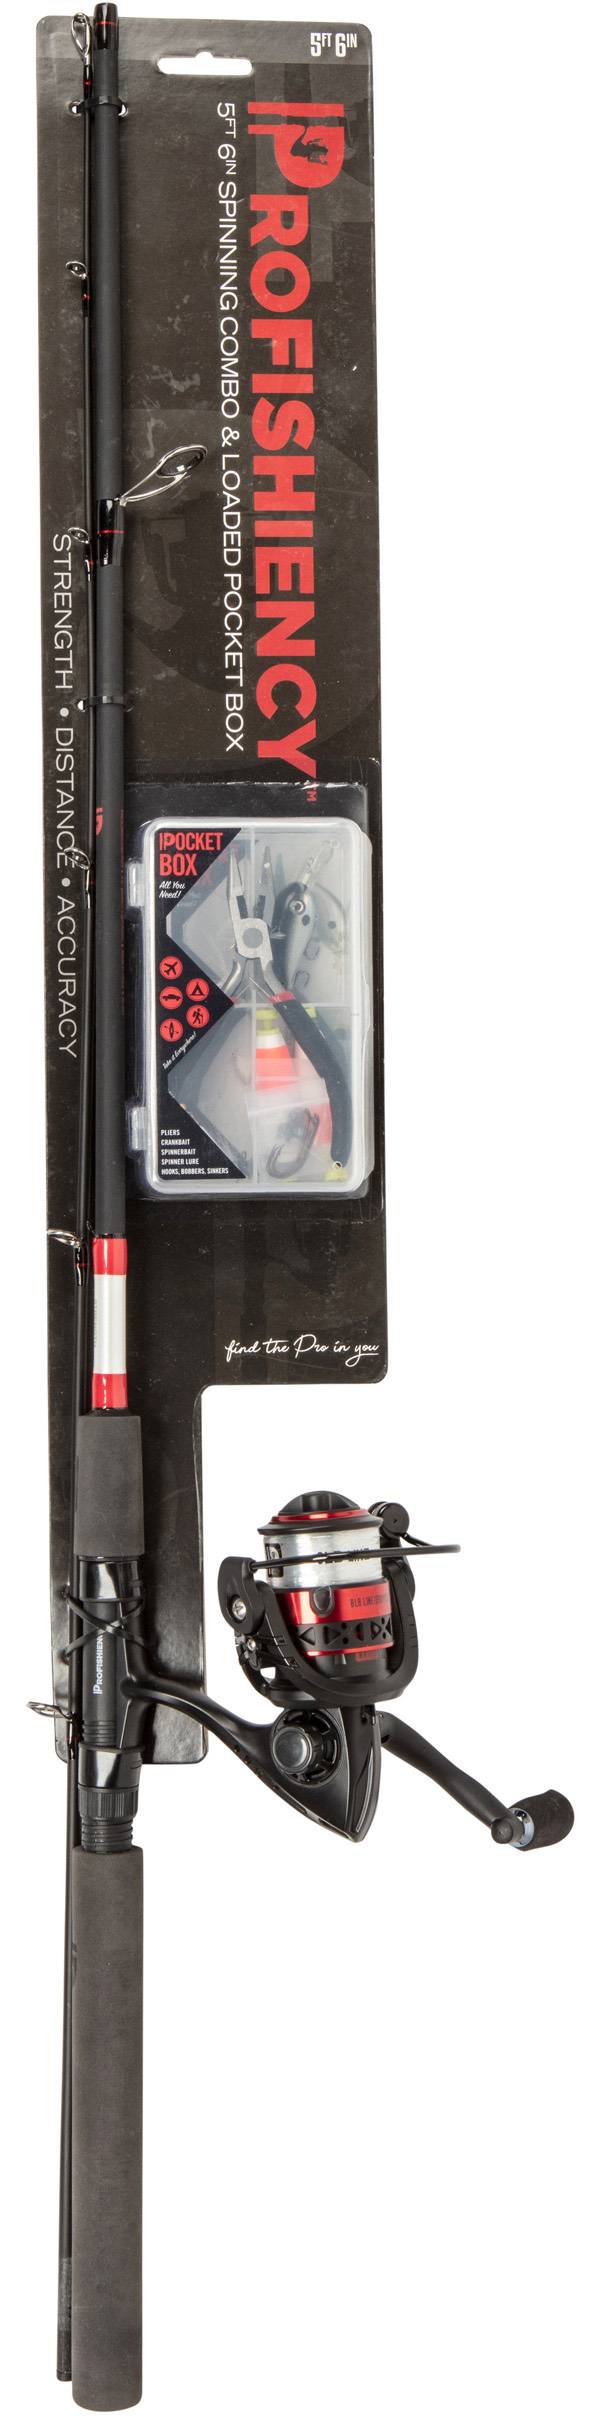 Lil' Anglers Profishiency Youth Spinning Combo Kit product image